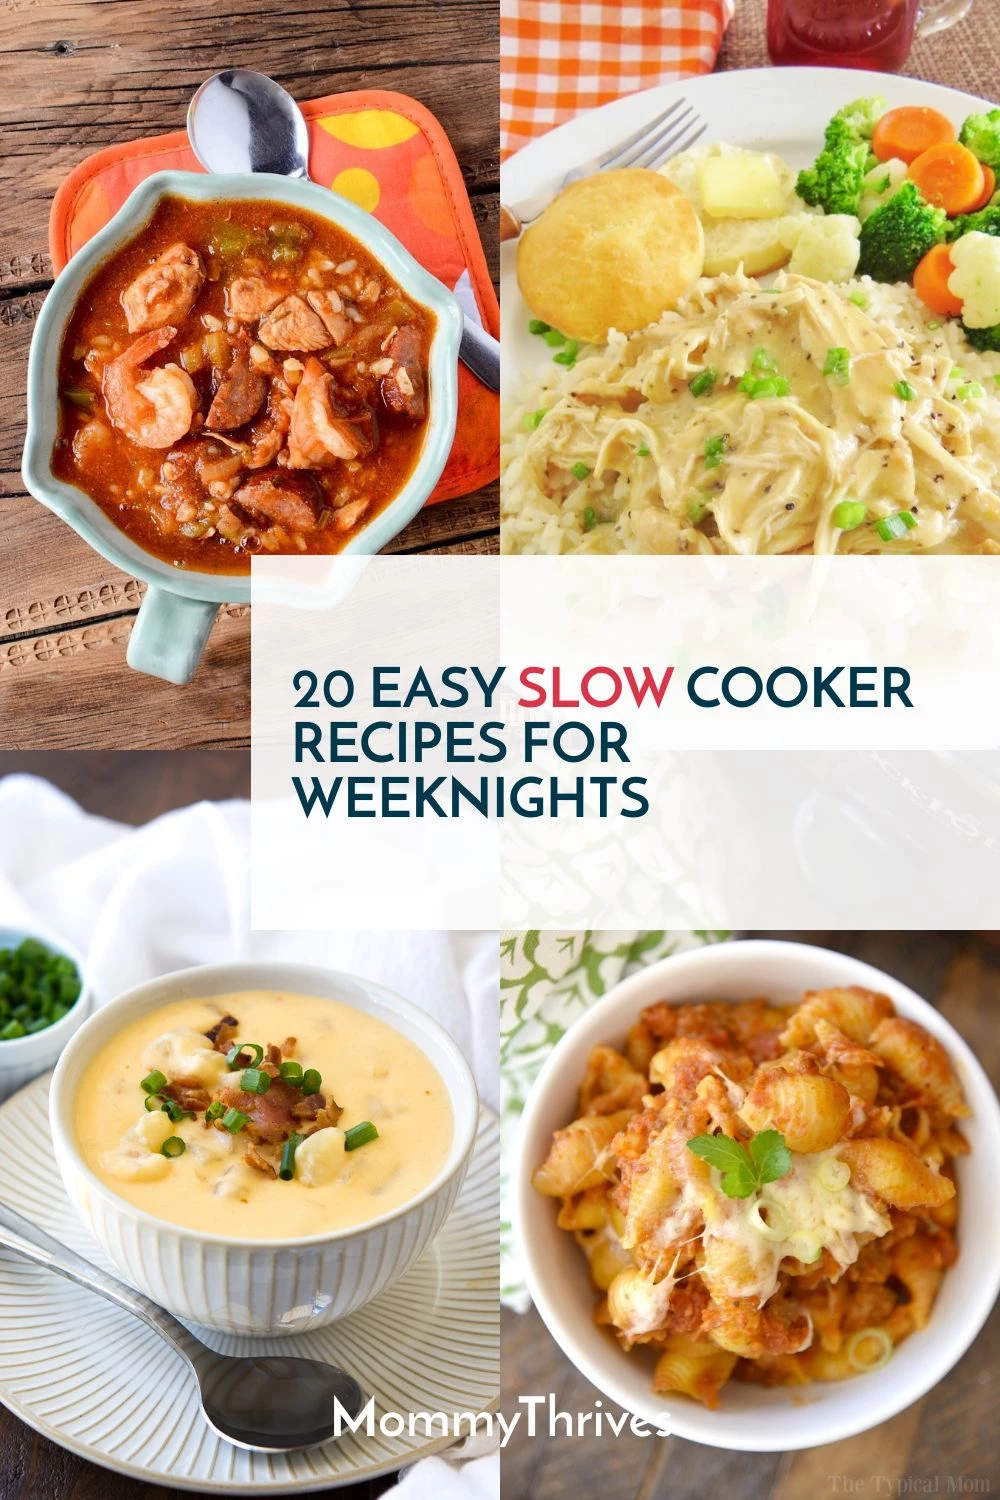 My Slow Cookers - Recipes That Crock!